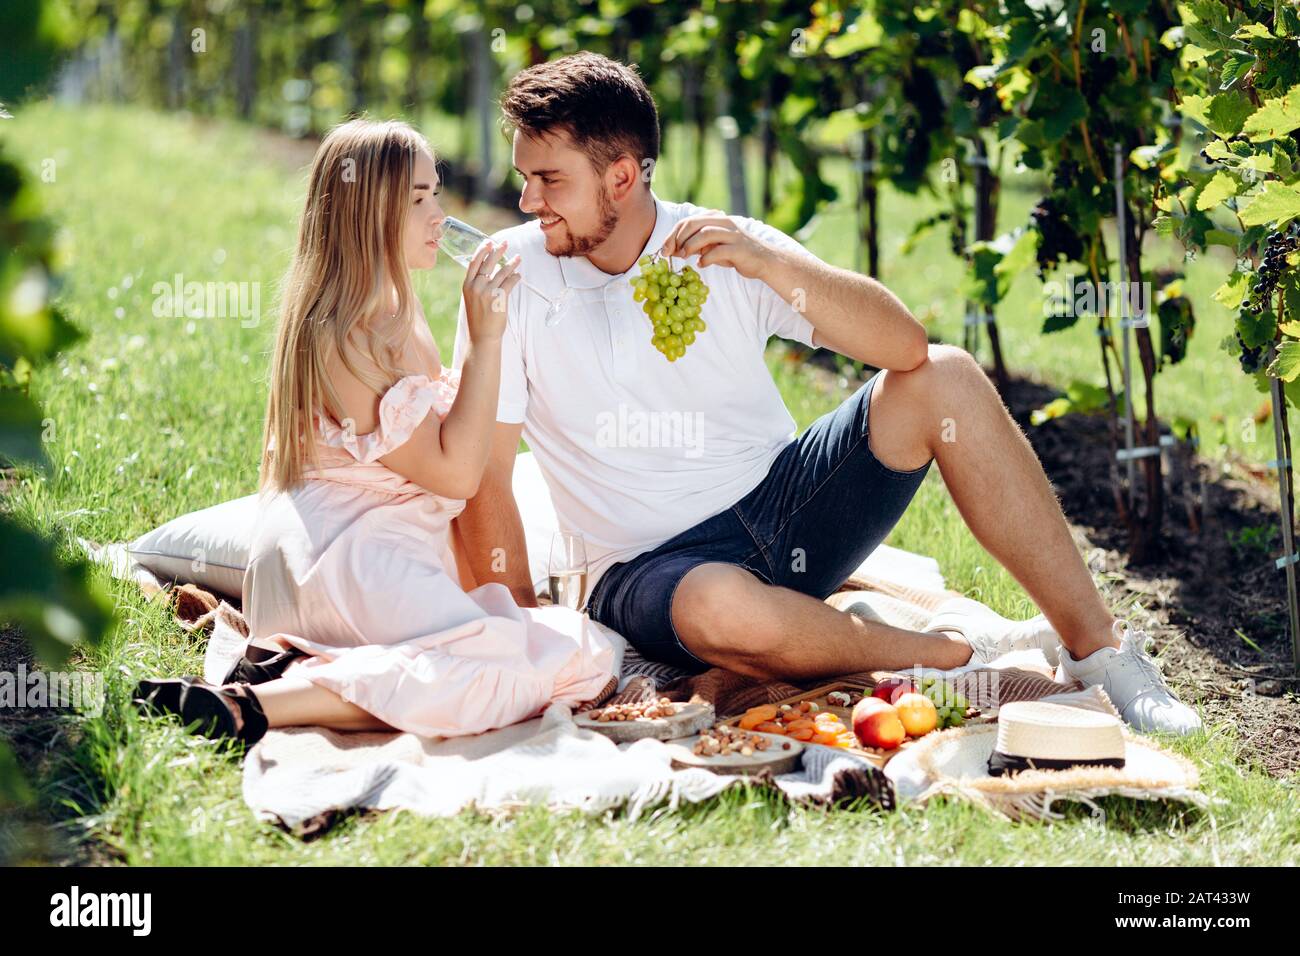 Enamored girl and boy sitting on blanket eating grapes and drinking wine during picnic in grape garden Stock Photo